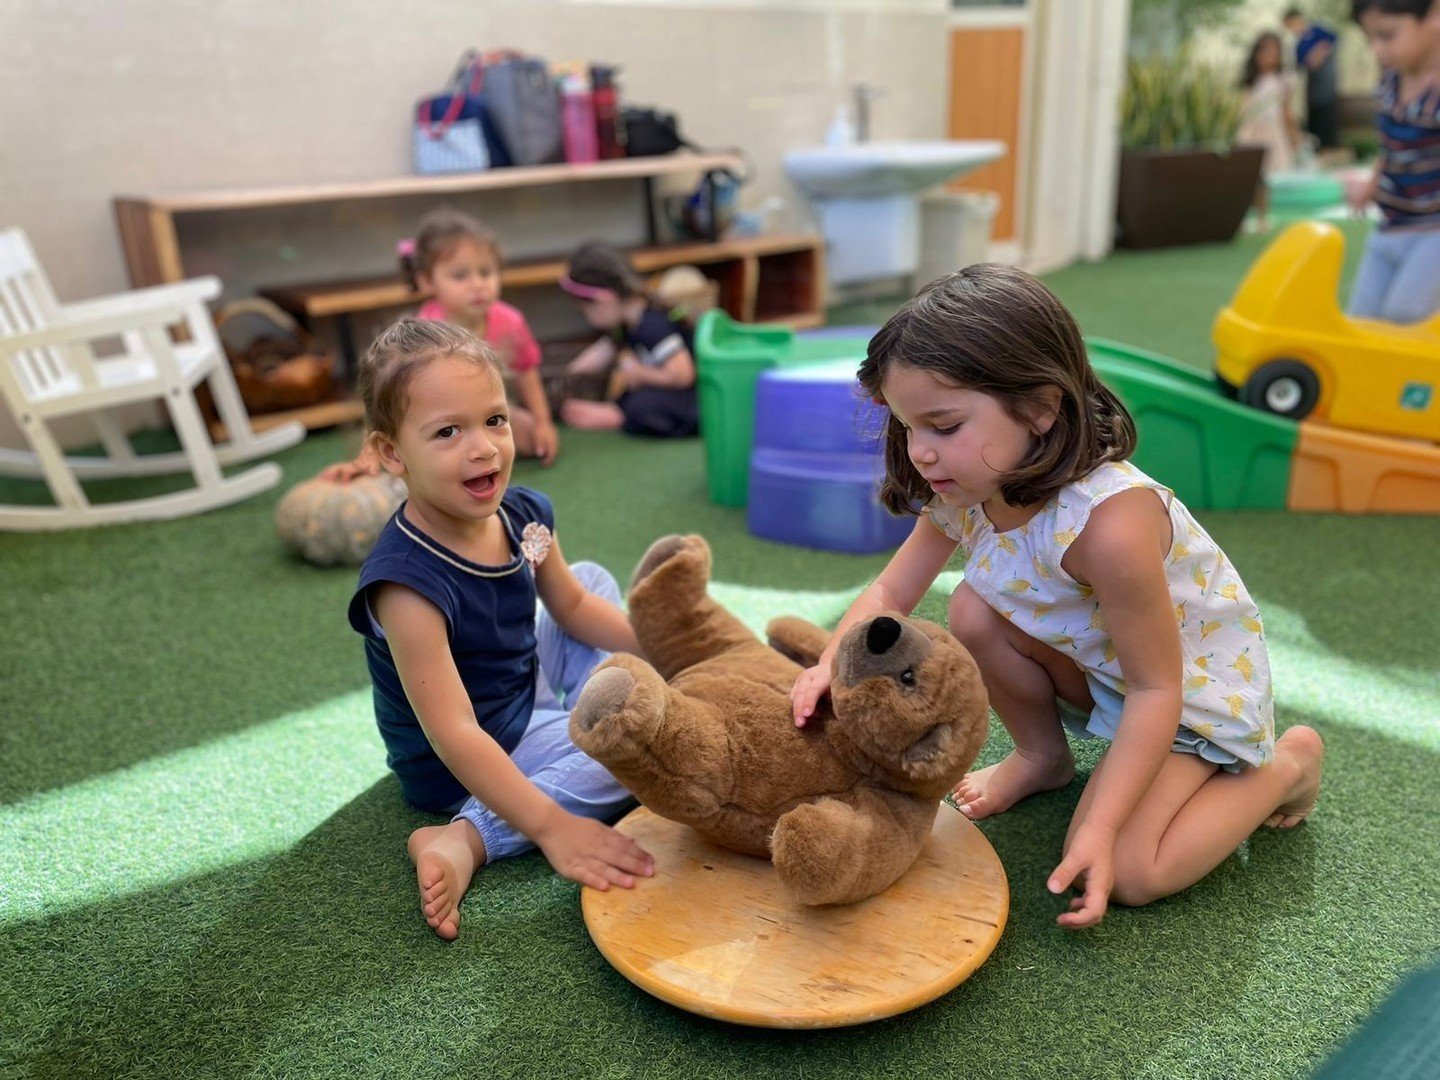 A merry-go-round for a teddy bear! This &lsquo;lazy susan&rsquo; cake stand is used for all sorts of things in Nature Zone&hellip;a truly multi-use resource!⁠
⁠
⁠
⁠
#inspirephilosophy#learningthroughplay #playbasedlearning  #econursery #jumeirah #dub